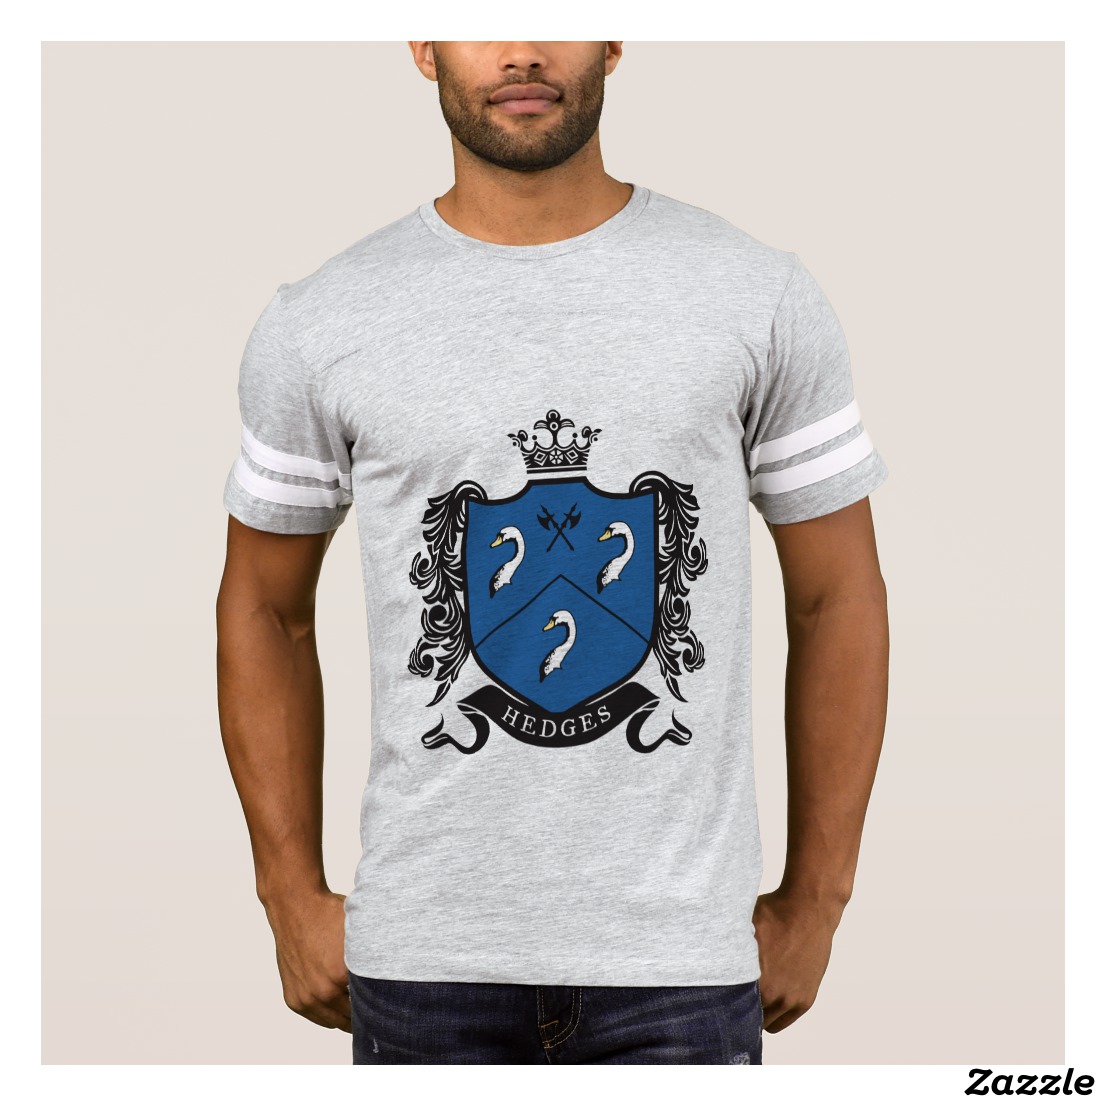 Gray Hedges T-shirt with modern family crest